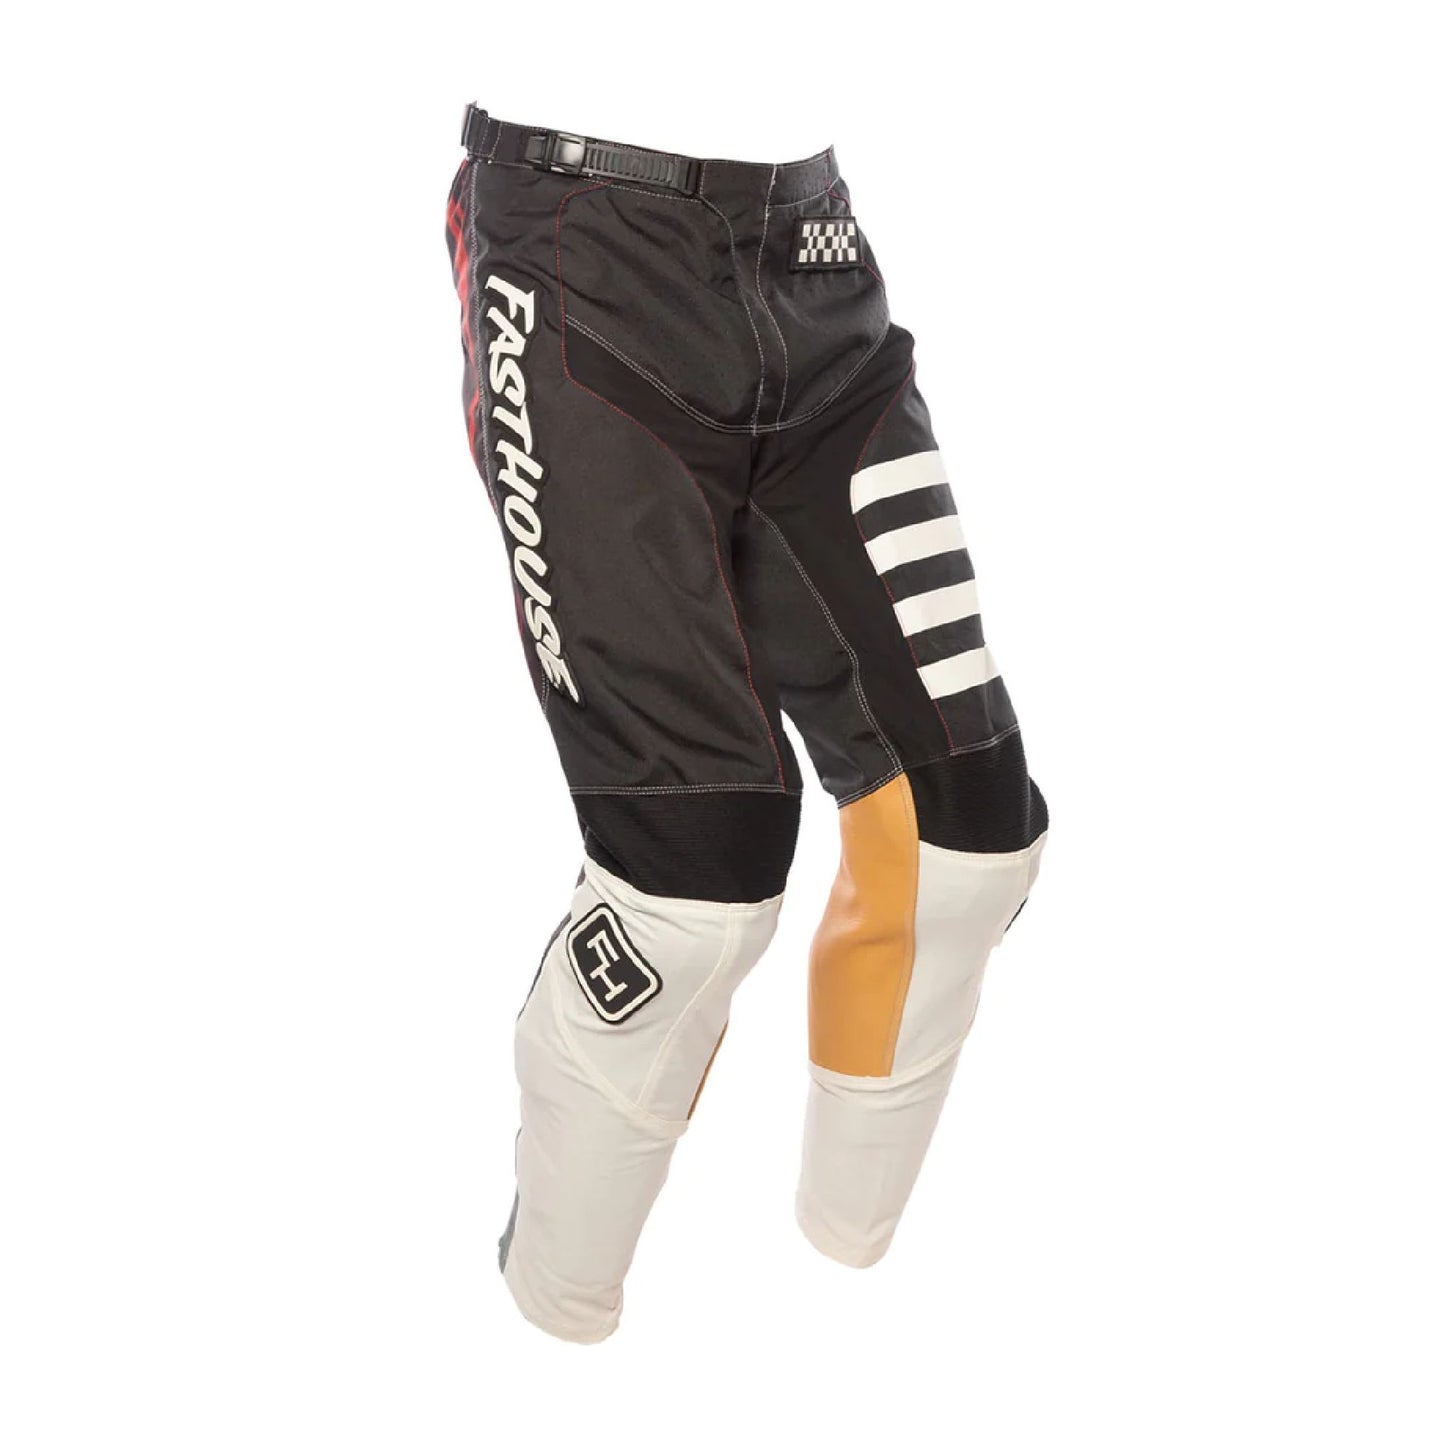 Fasthouse Youth Grindhouse Pants Black/Cream Bike Pants